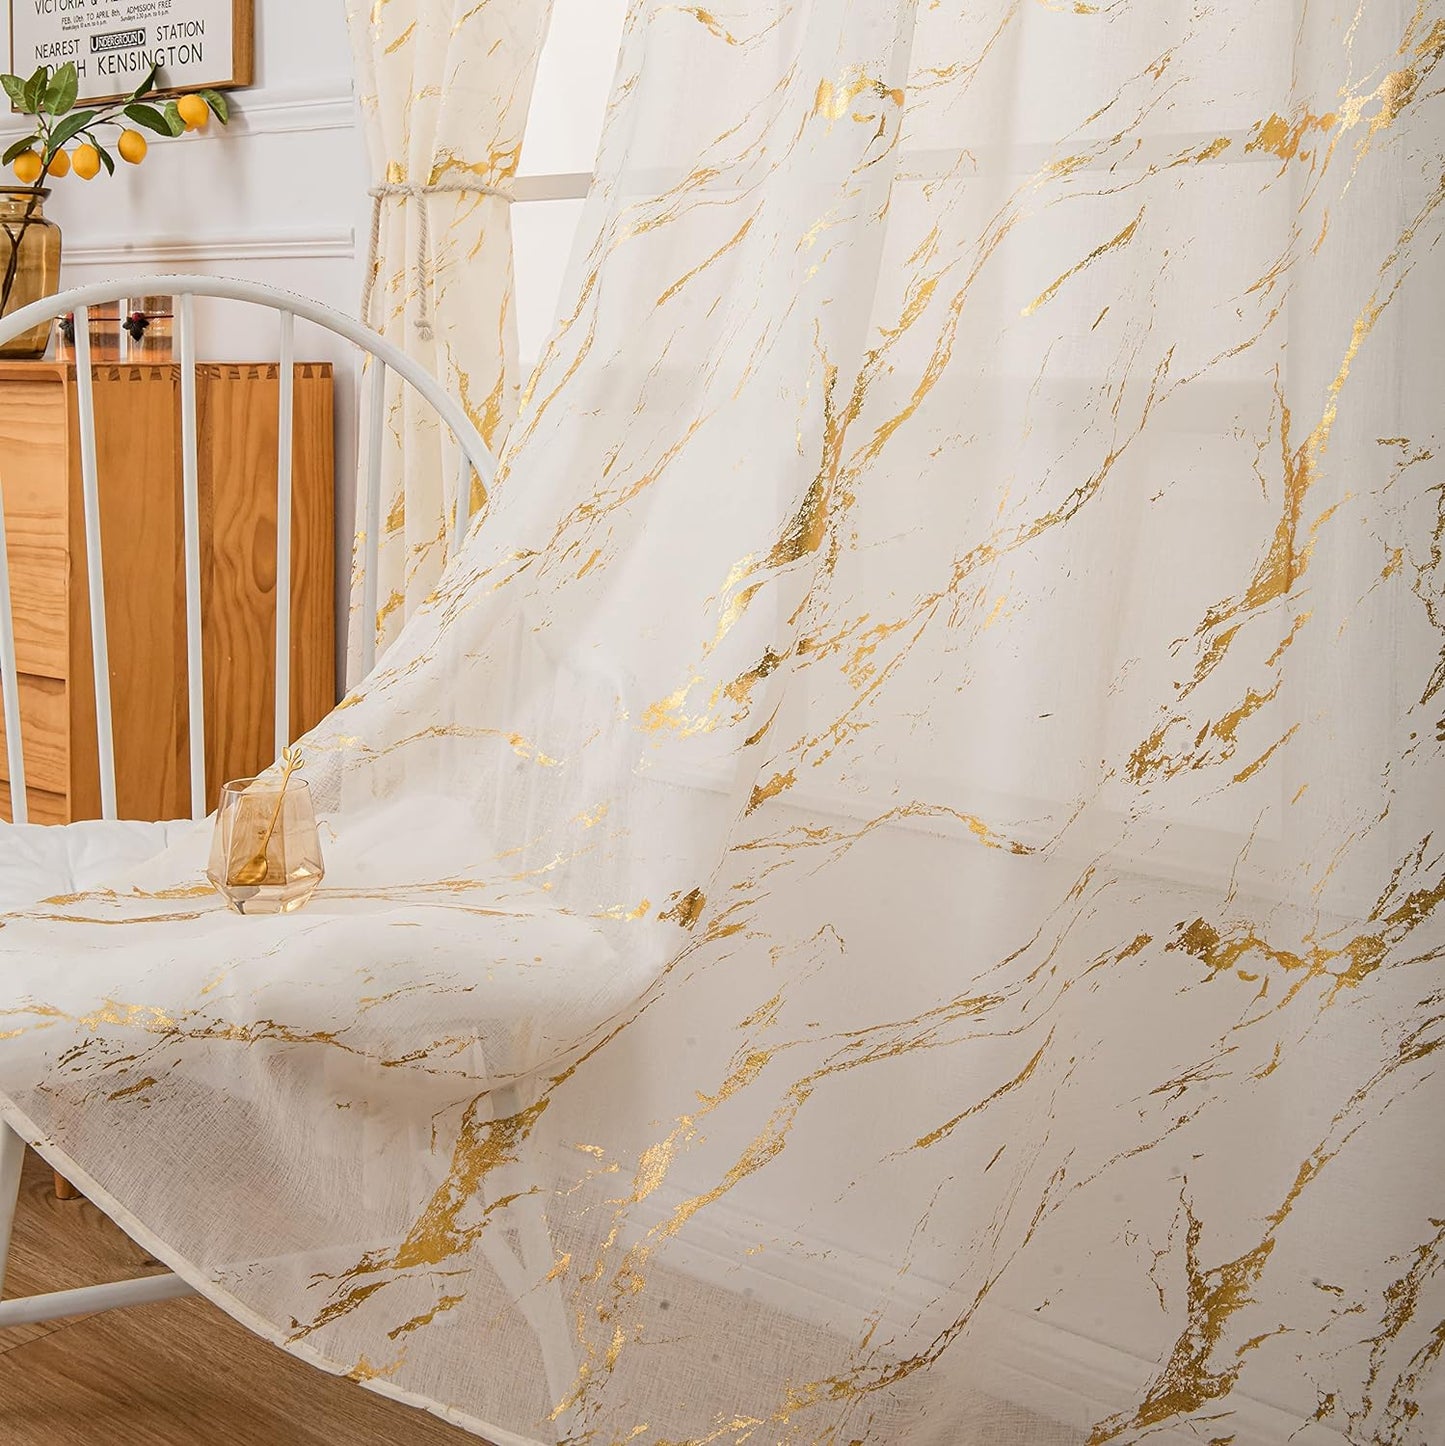 Sutuo Home Marble White Sheer Curtains 84 Inch Length, Gold Foil Print Metallic Bronzing, Privacy Window Treatment Decor Abstract Drape Pair 2 Panels Set for Bedroom Kitchen Living Room 52" W X 84" L  Sutuo Home Gold And Ivory 52" W X 108" L, 2 Panels 